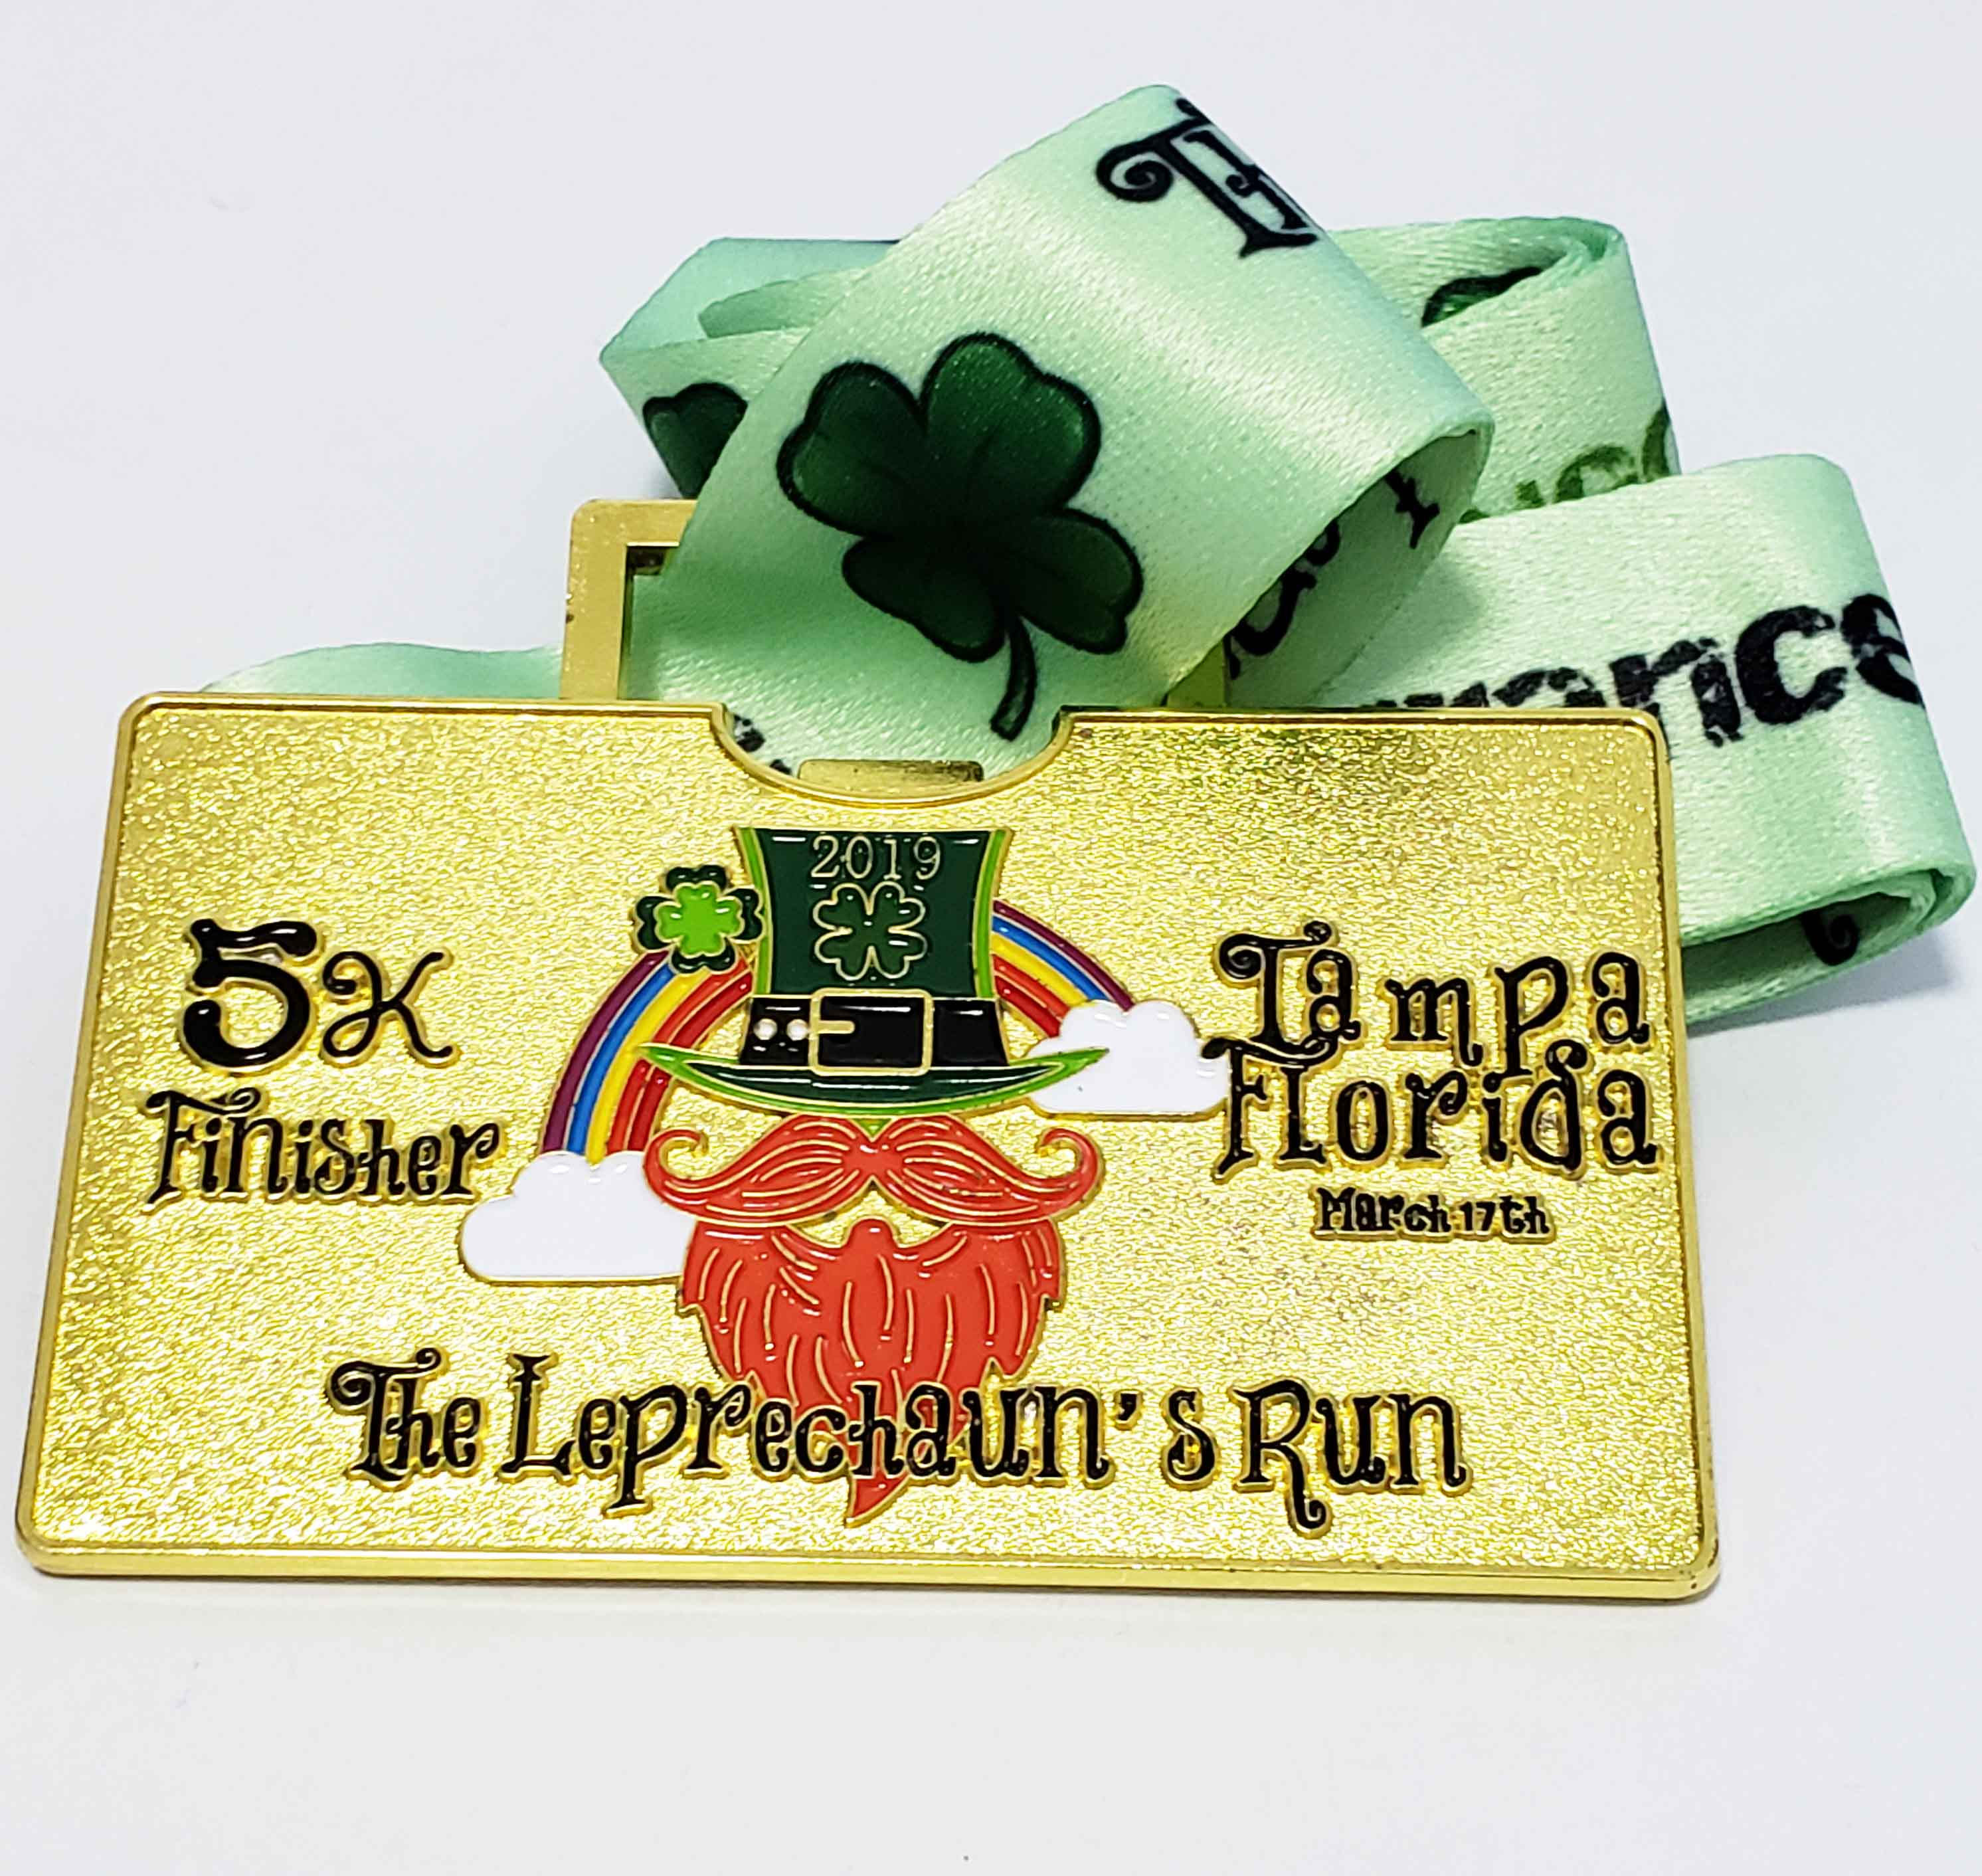 5k running medal with gold plating